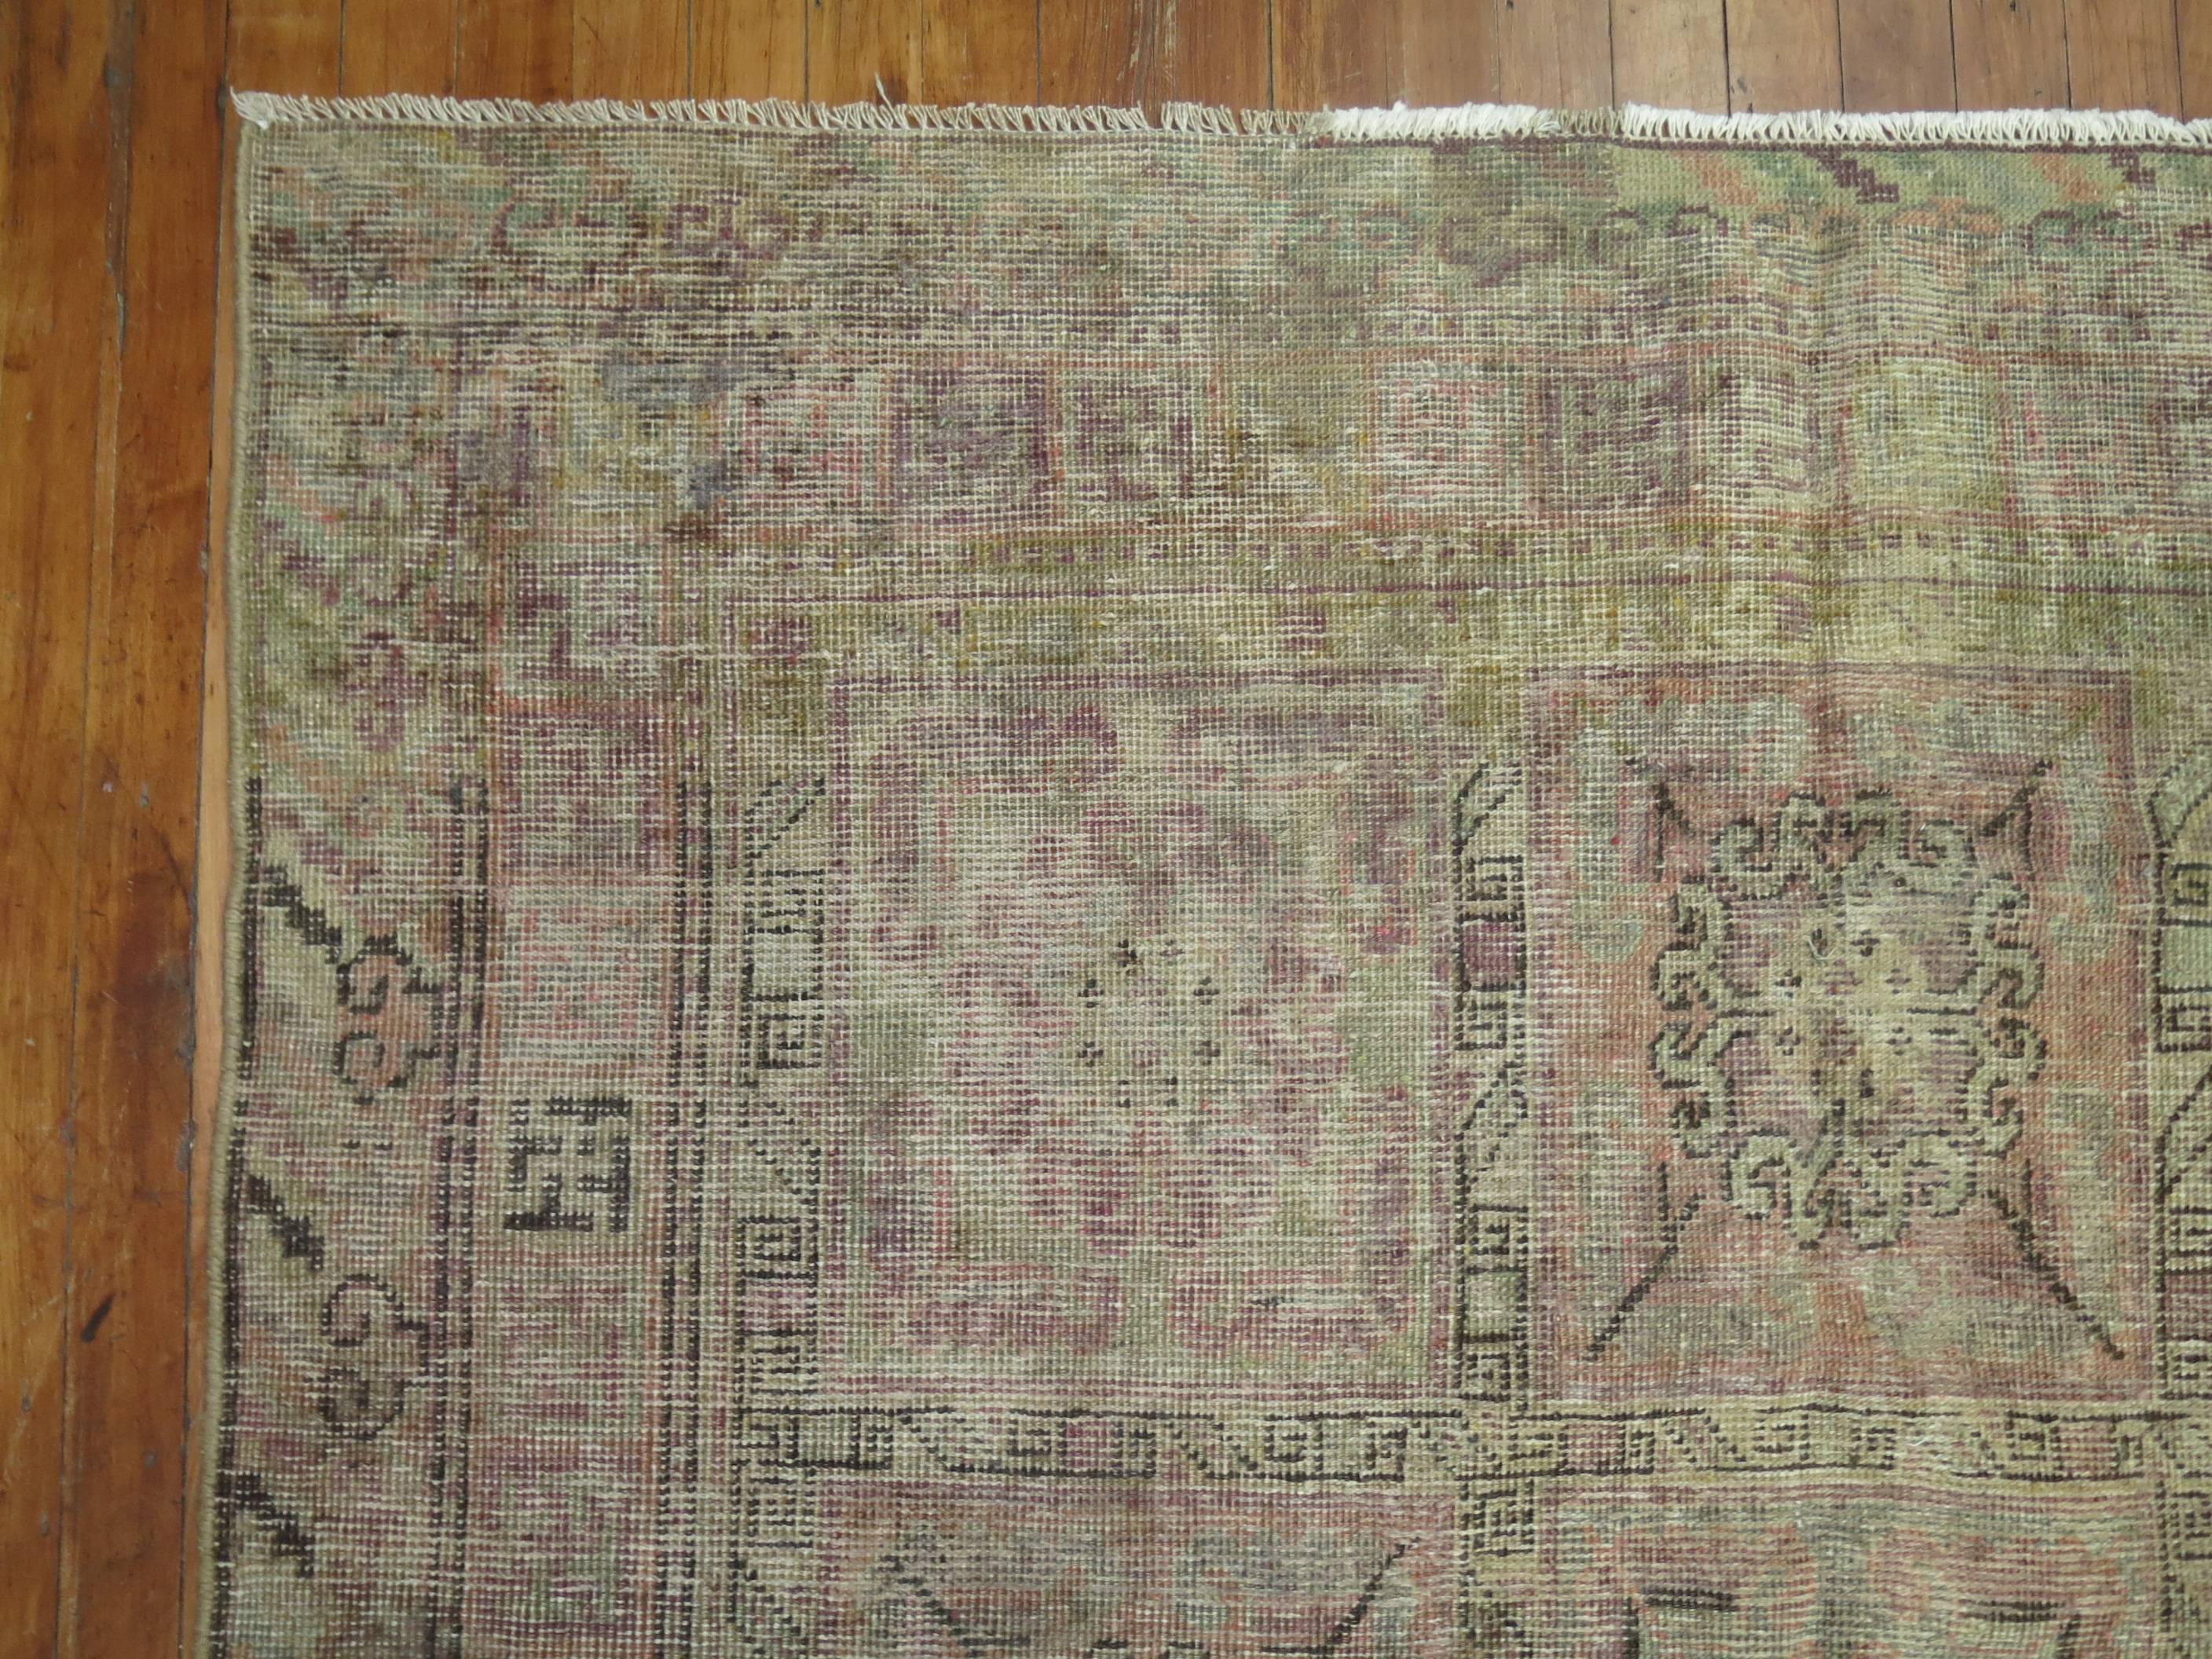 Antique shabby chic Khotan rug gallery size rug with faded grays, pinks, lavenders.

4'11'' x 10'3''